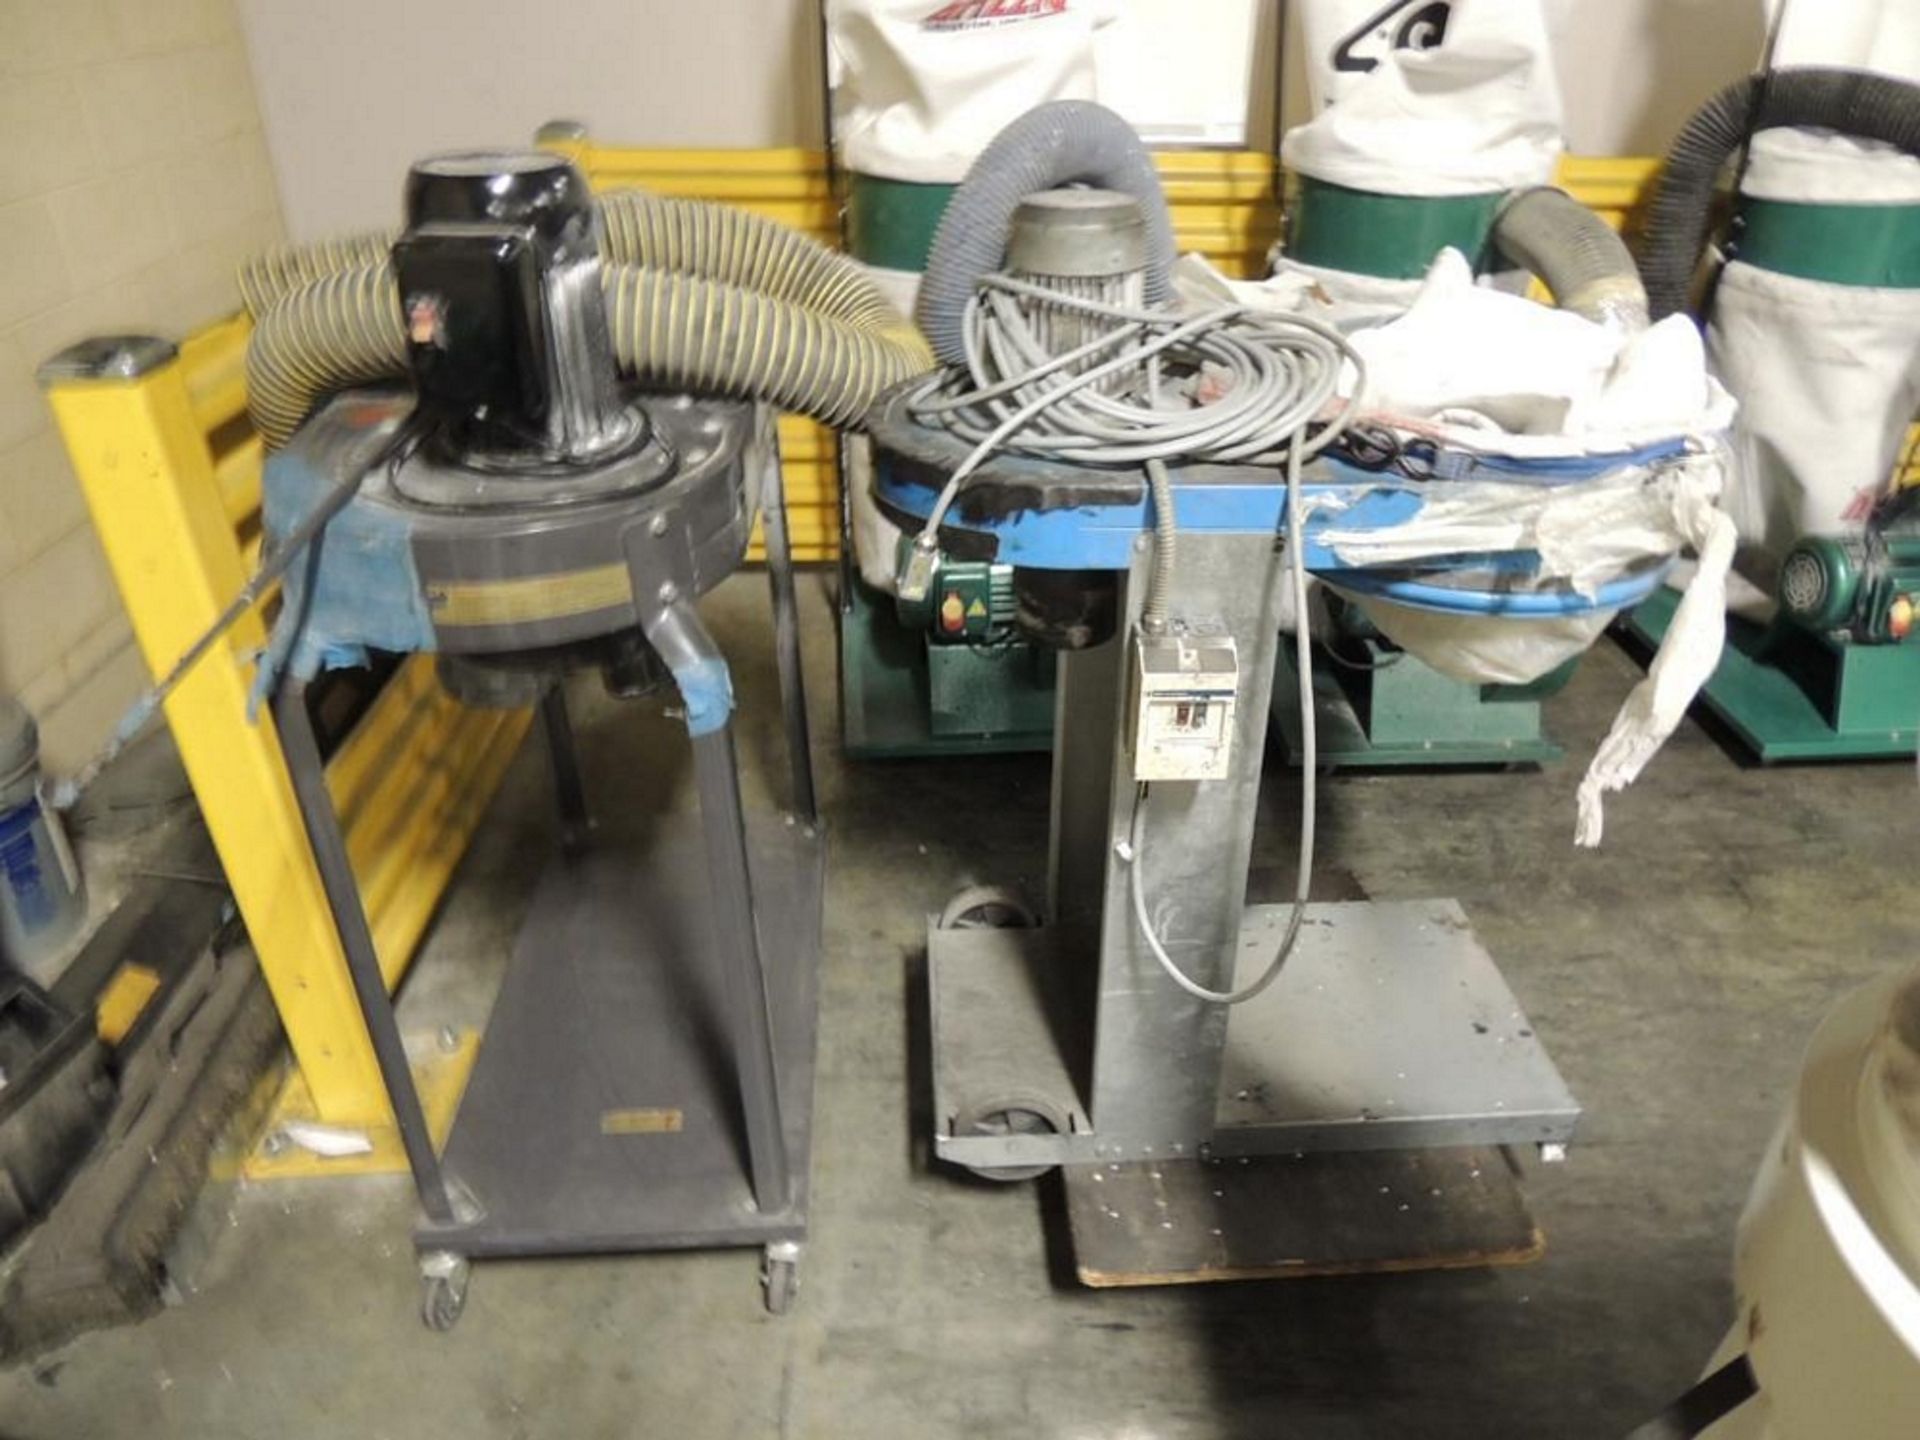 LOT: (2) Kufo Dust Collector Model Ufo-101h, 220/480 Volt, (2) Unknown Mfg. Dust Collectors Incomple - Image 2 of 3